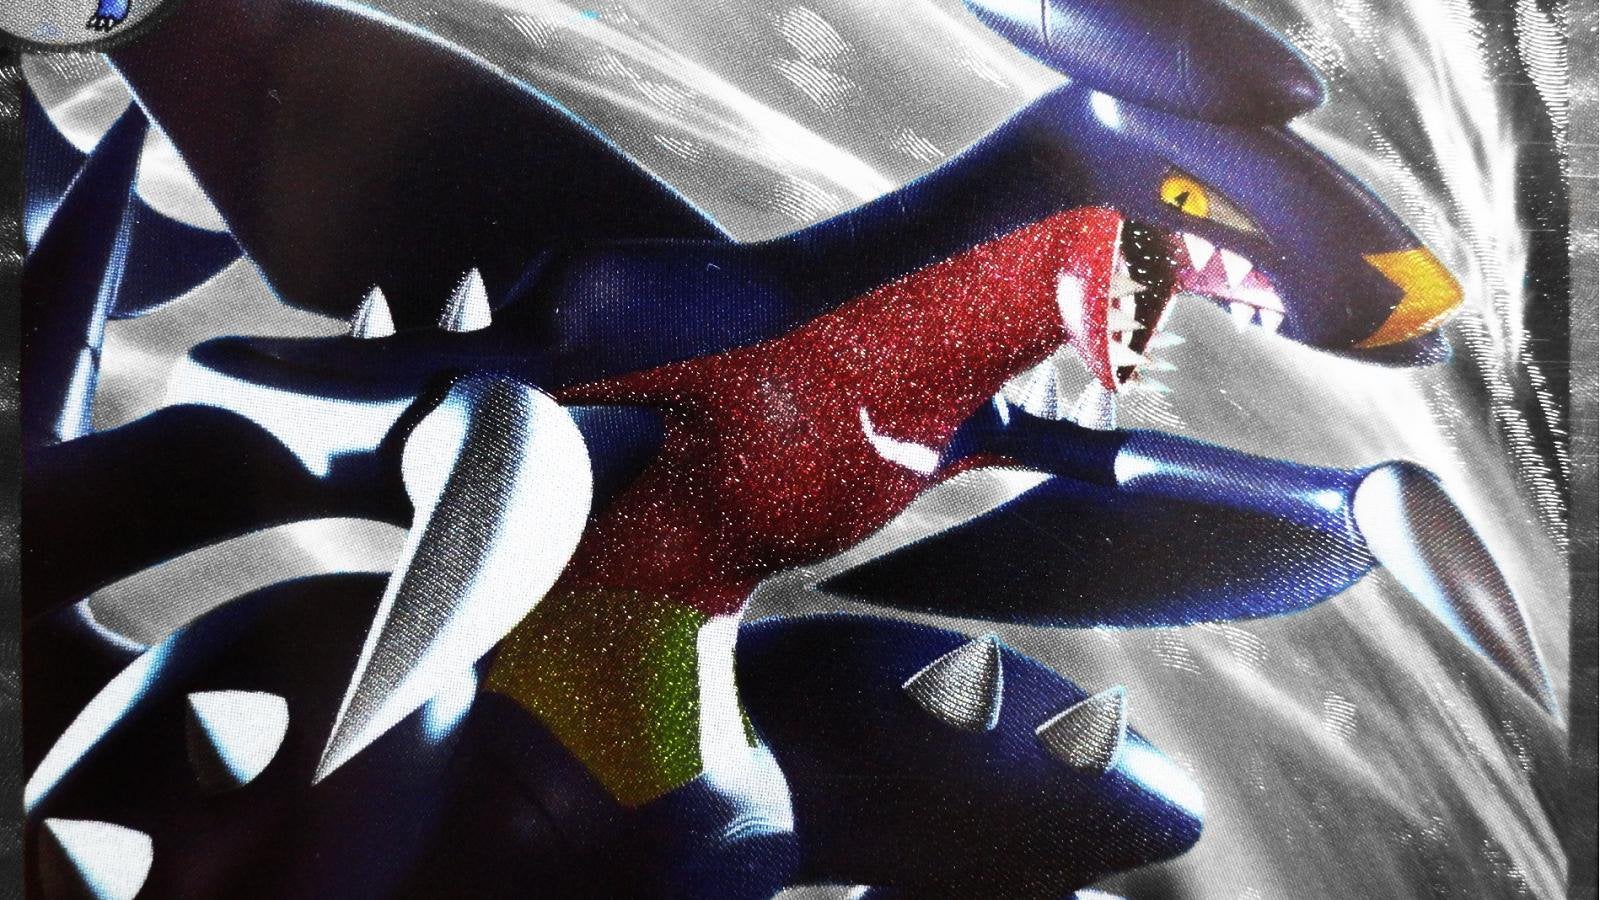 1600x900) Shiny Garchomp Background, Edited From A High Quality Photo Of The Card!